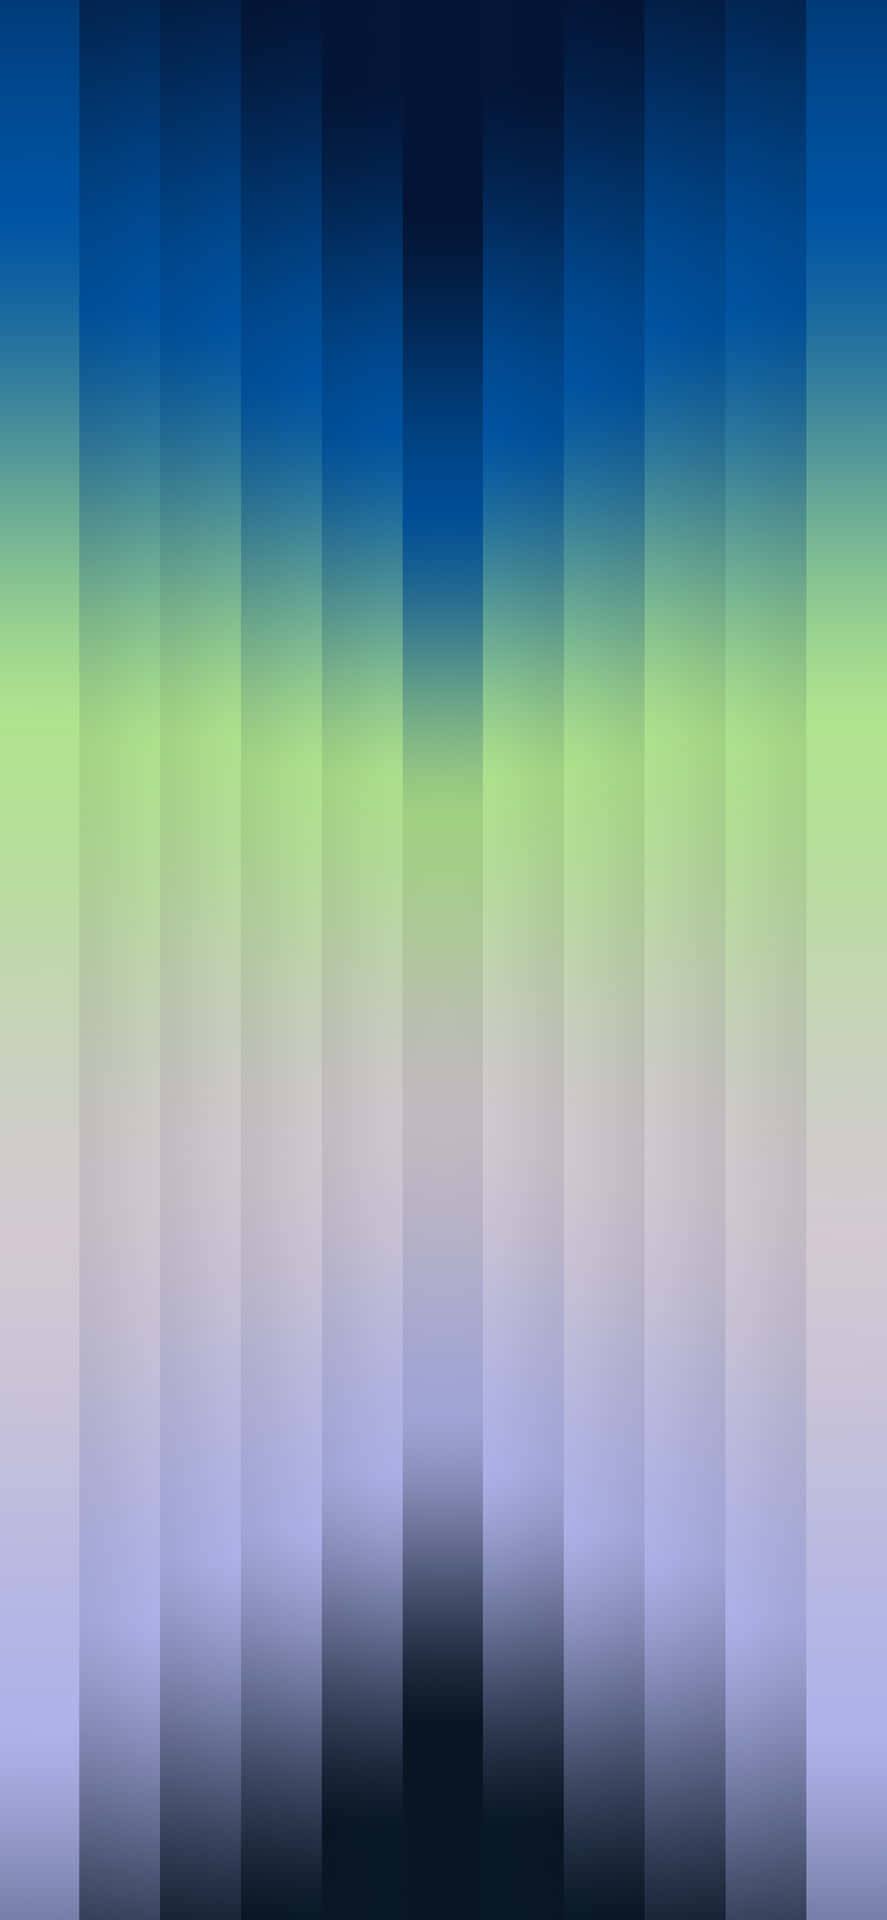 Blue, Green, And Lavender Stripes For Ios 3 Background